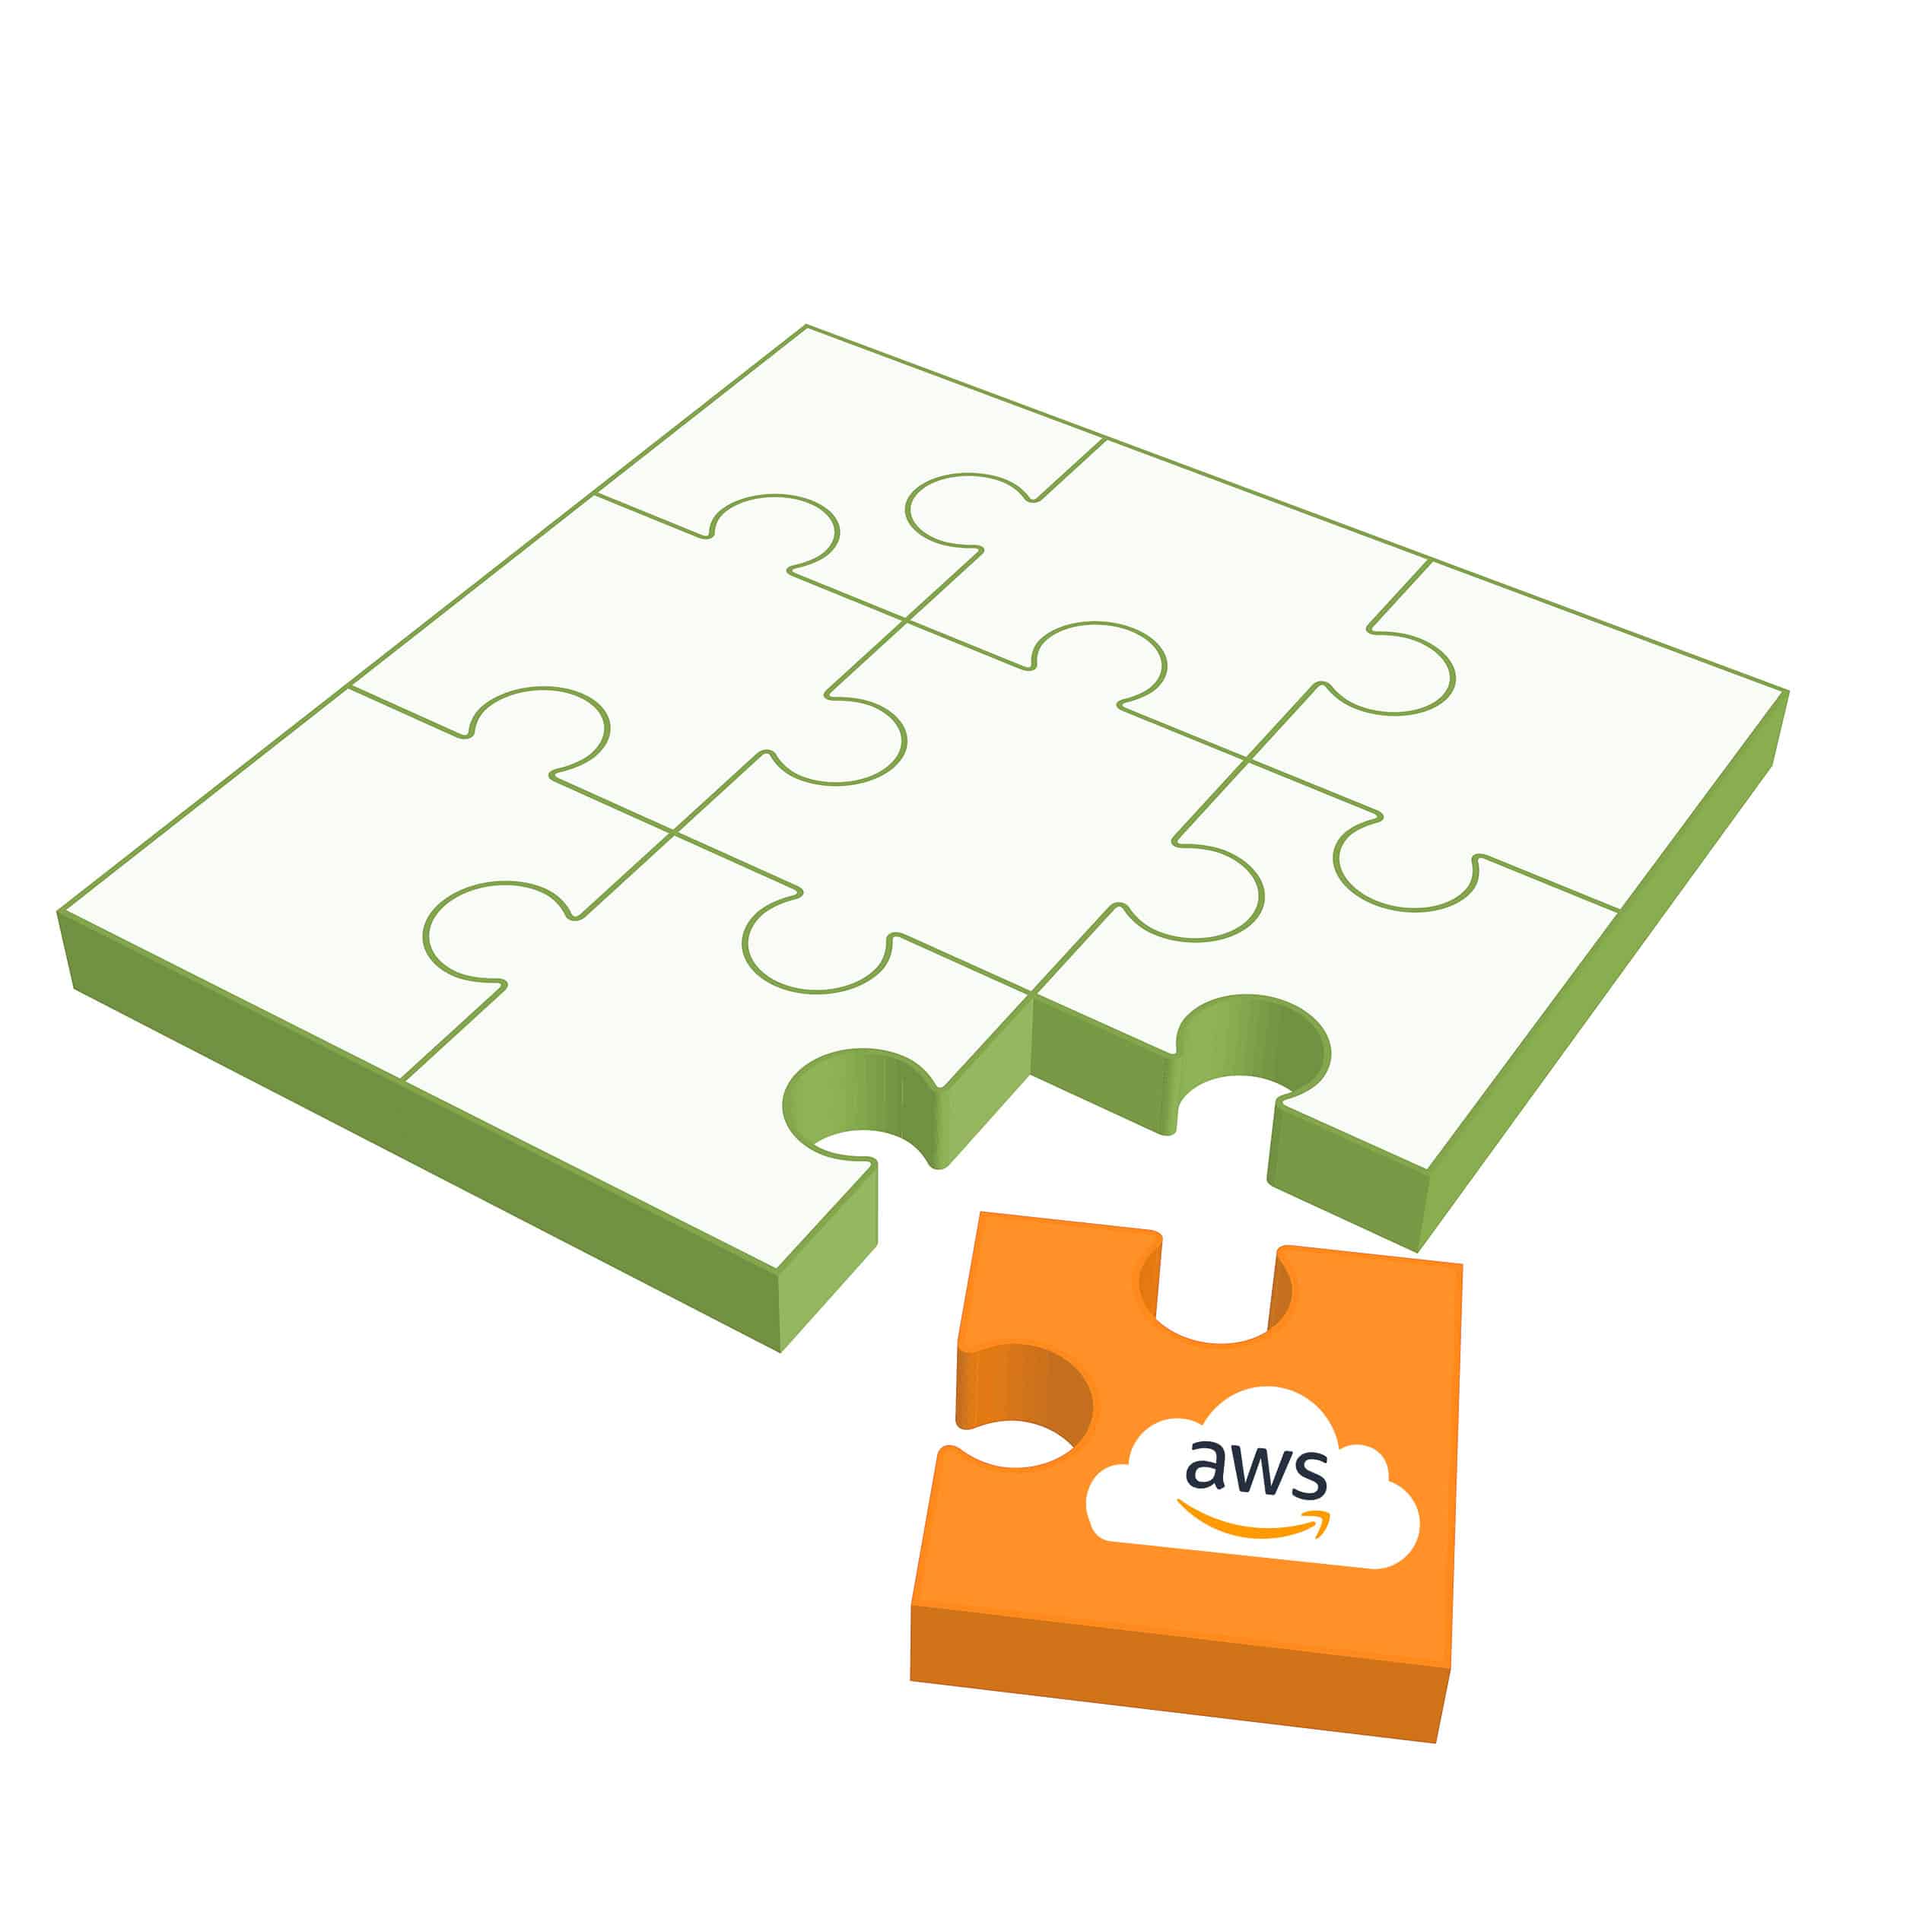 AWS piece not fitting into the Community puzzle.